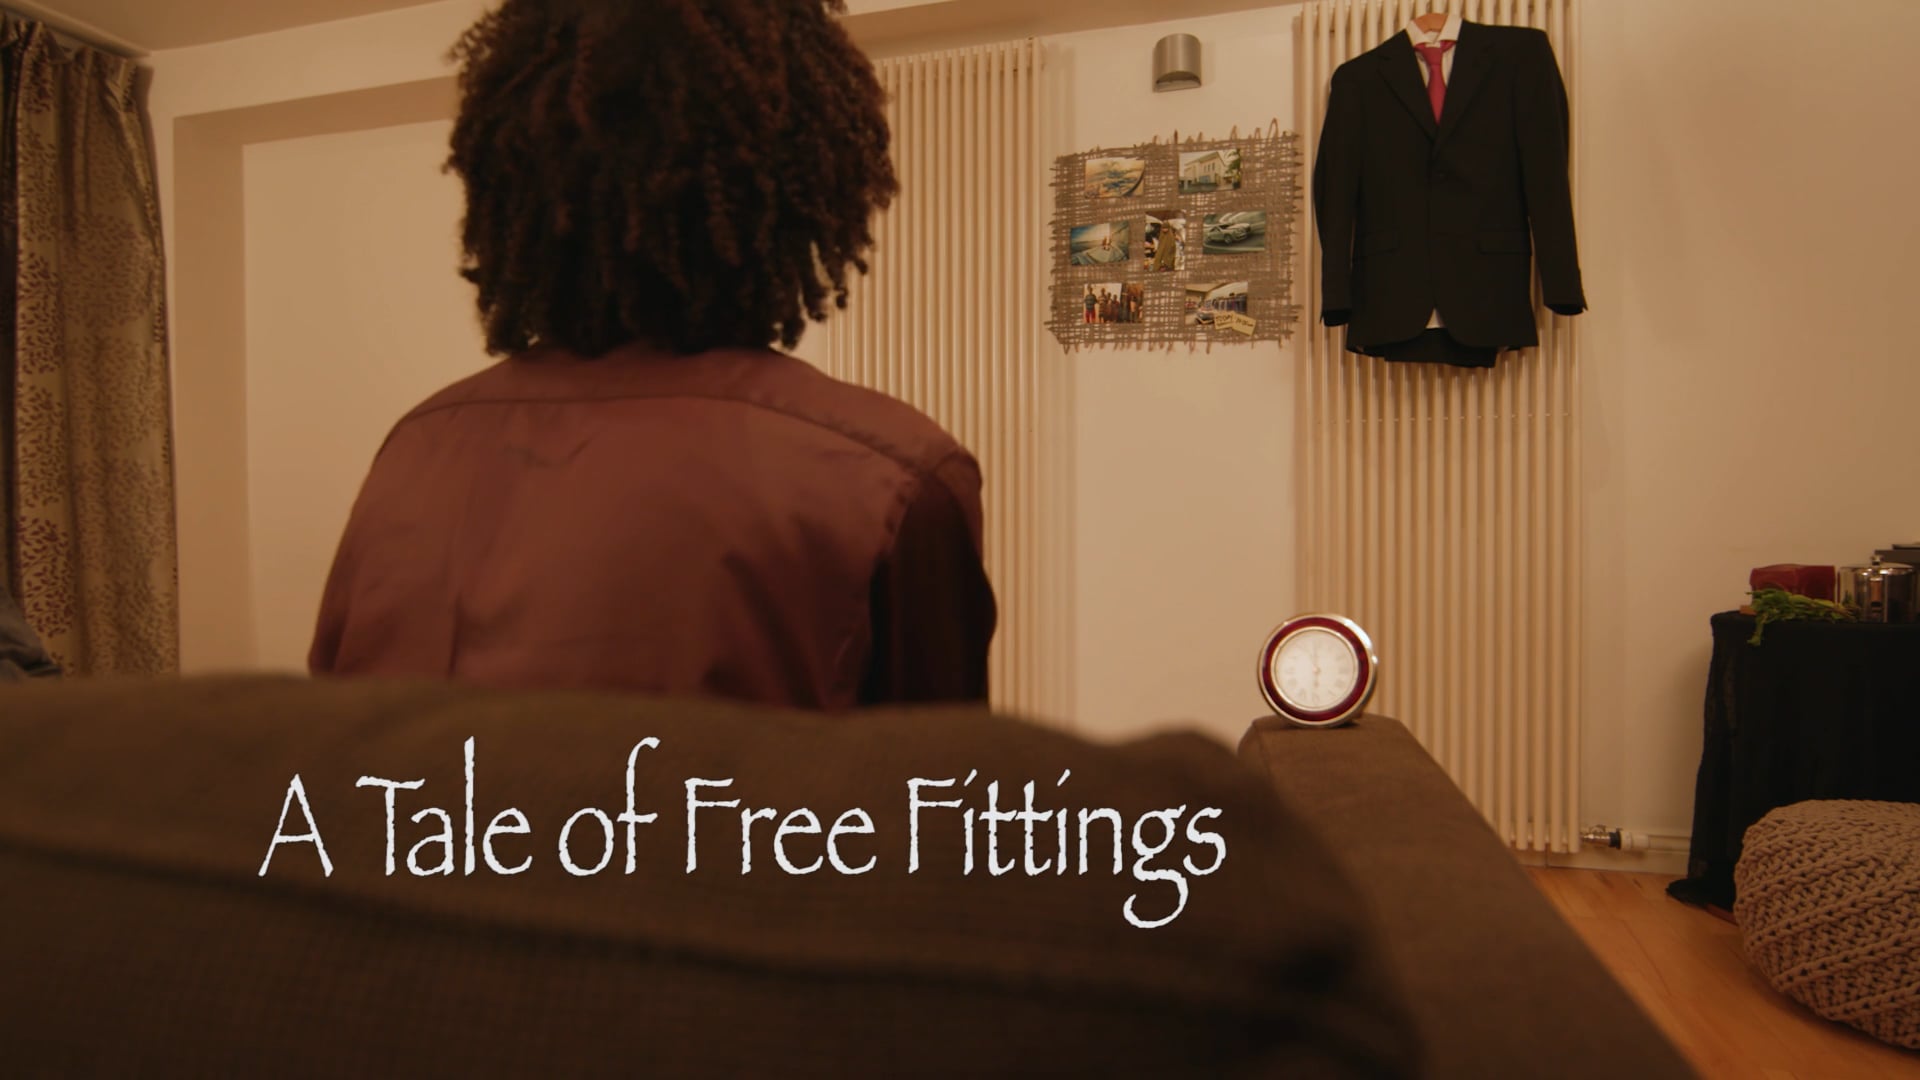 A Tale of Free Fittings